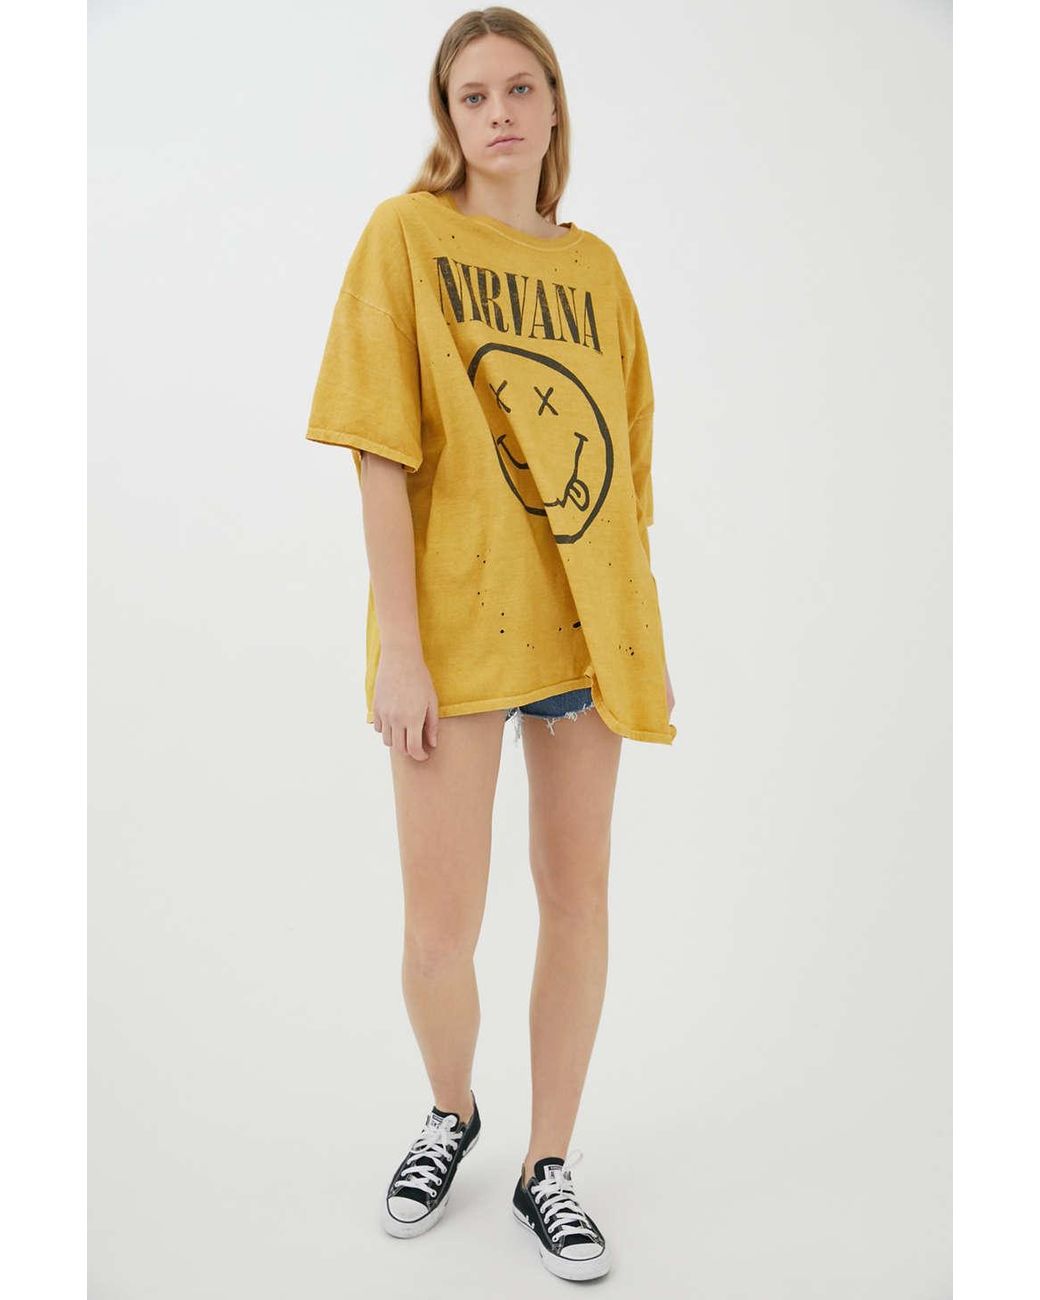 Urban Outfitters Destroyed T-shirt Dress | Lyst